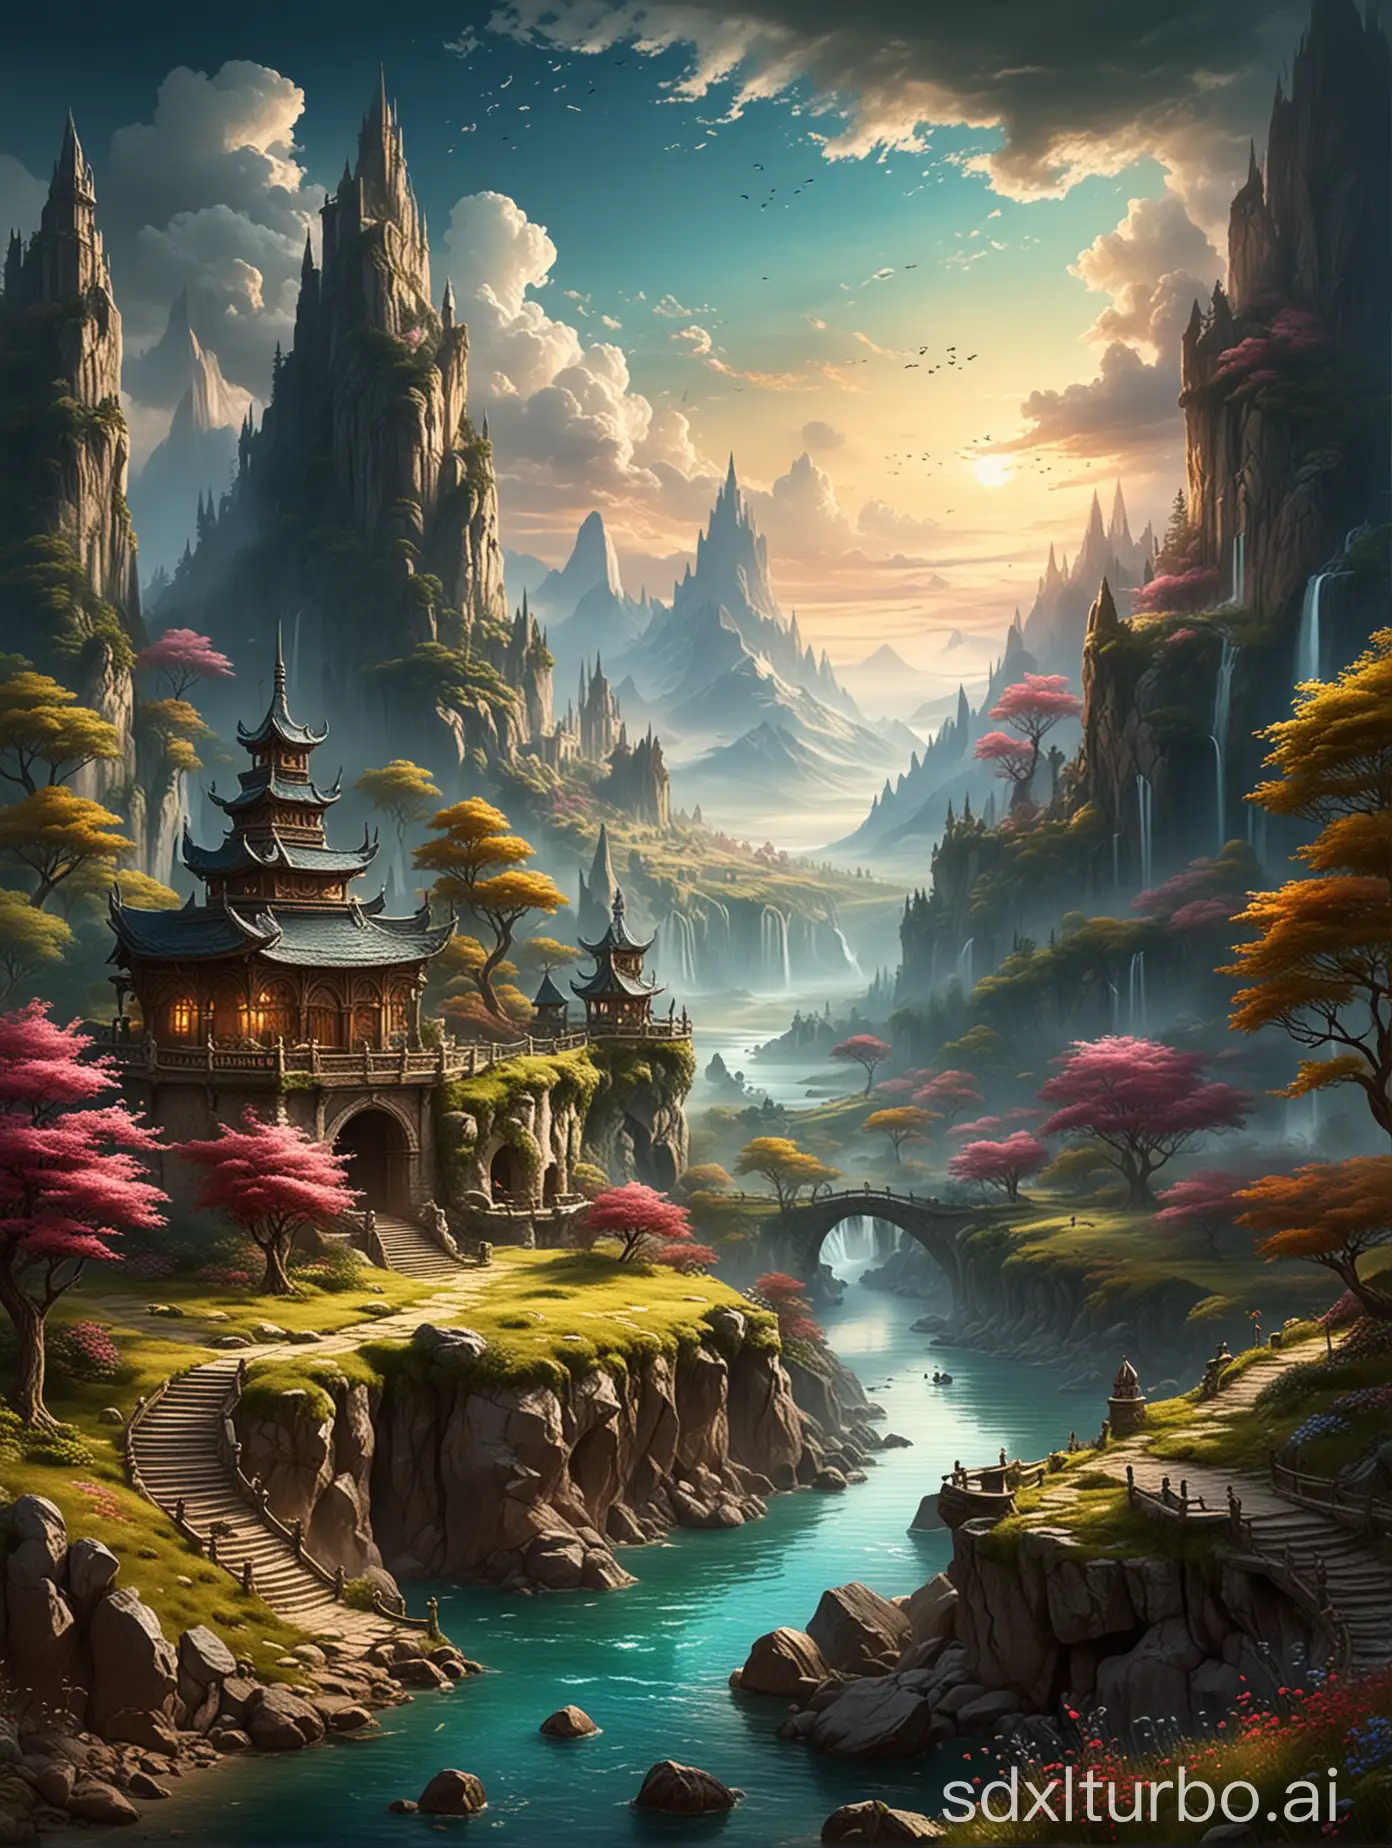 Enchanting-Fantasy-Landscape-with-Majestic-Castle-and-Ethereal-Creatures